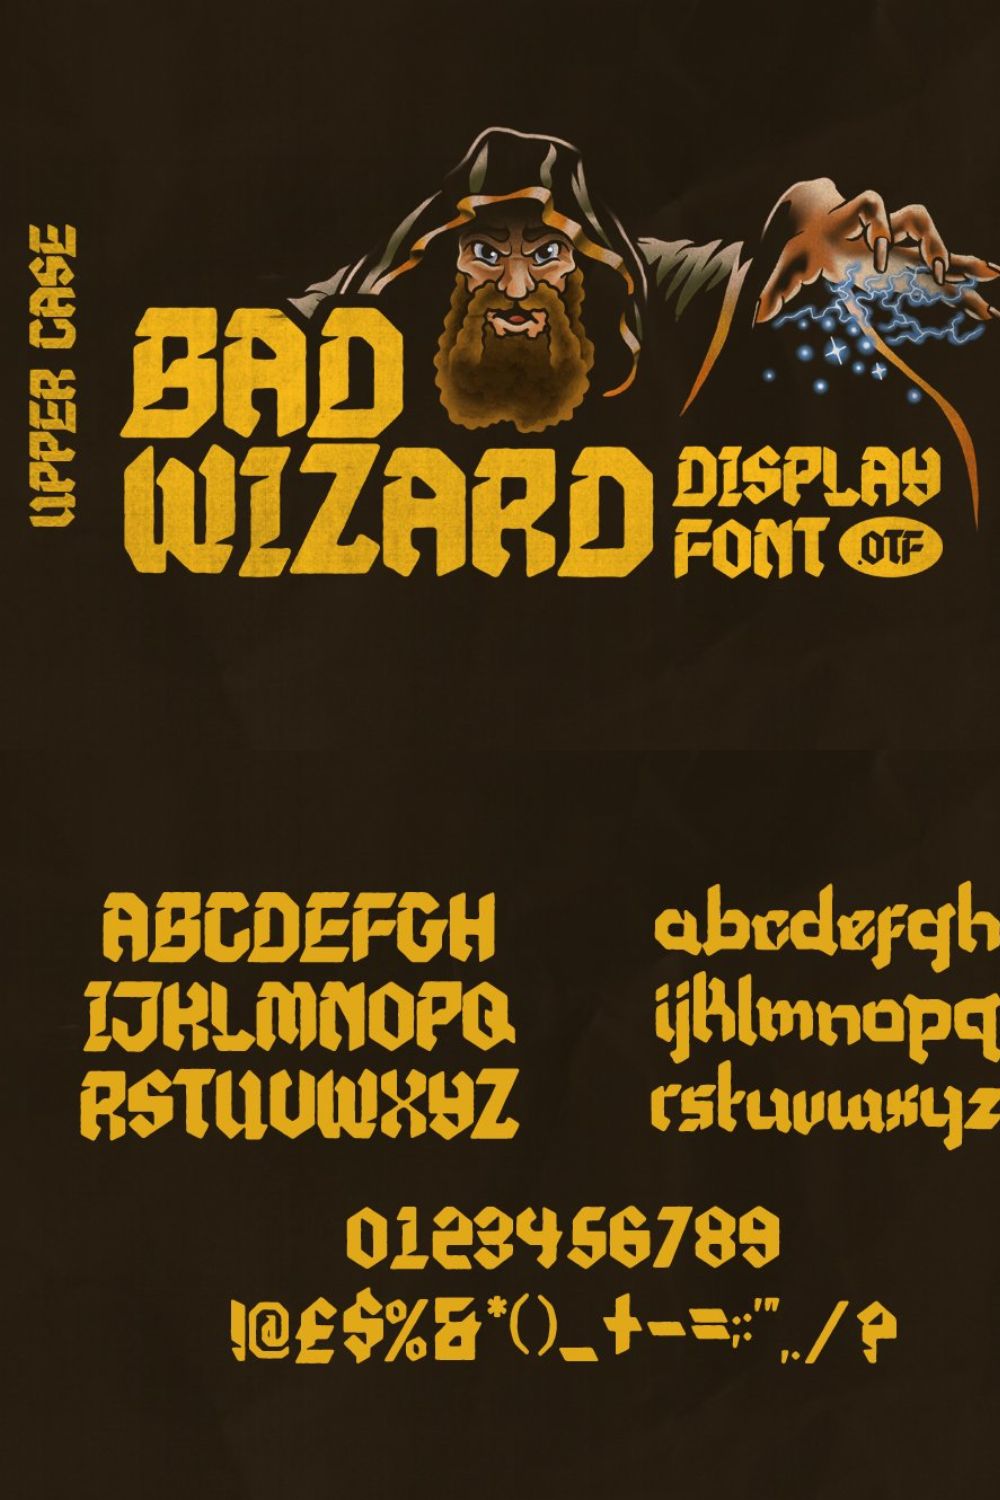 Bad Wizard Display Font pinterest preview image.